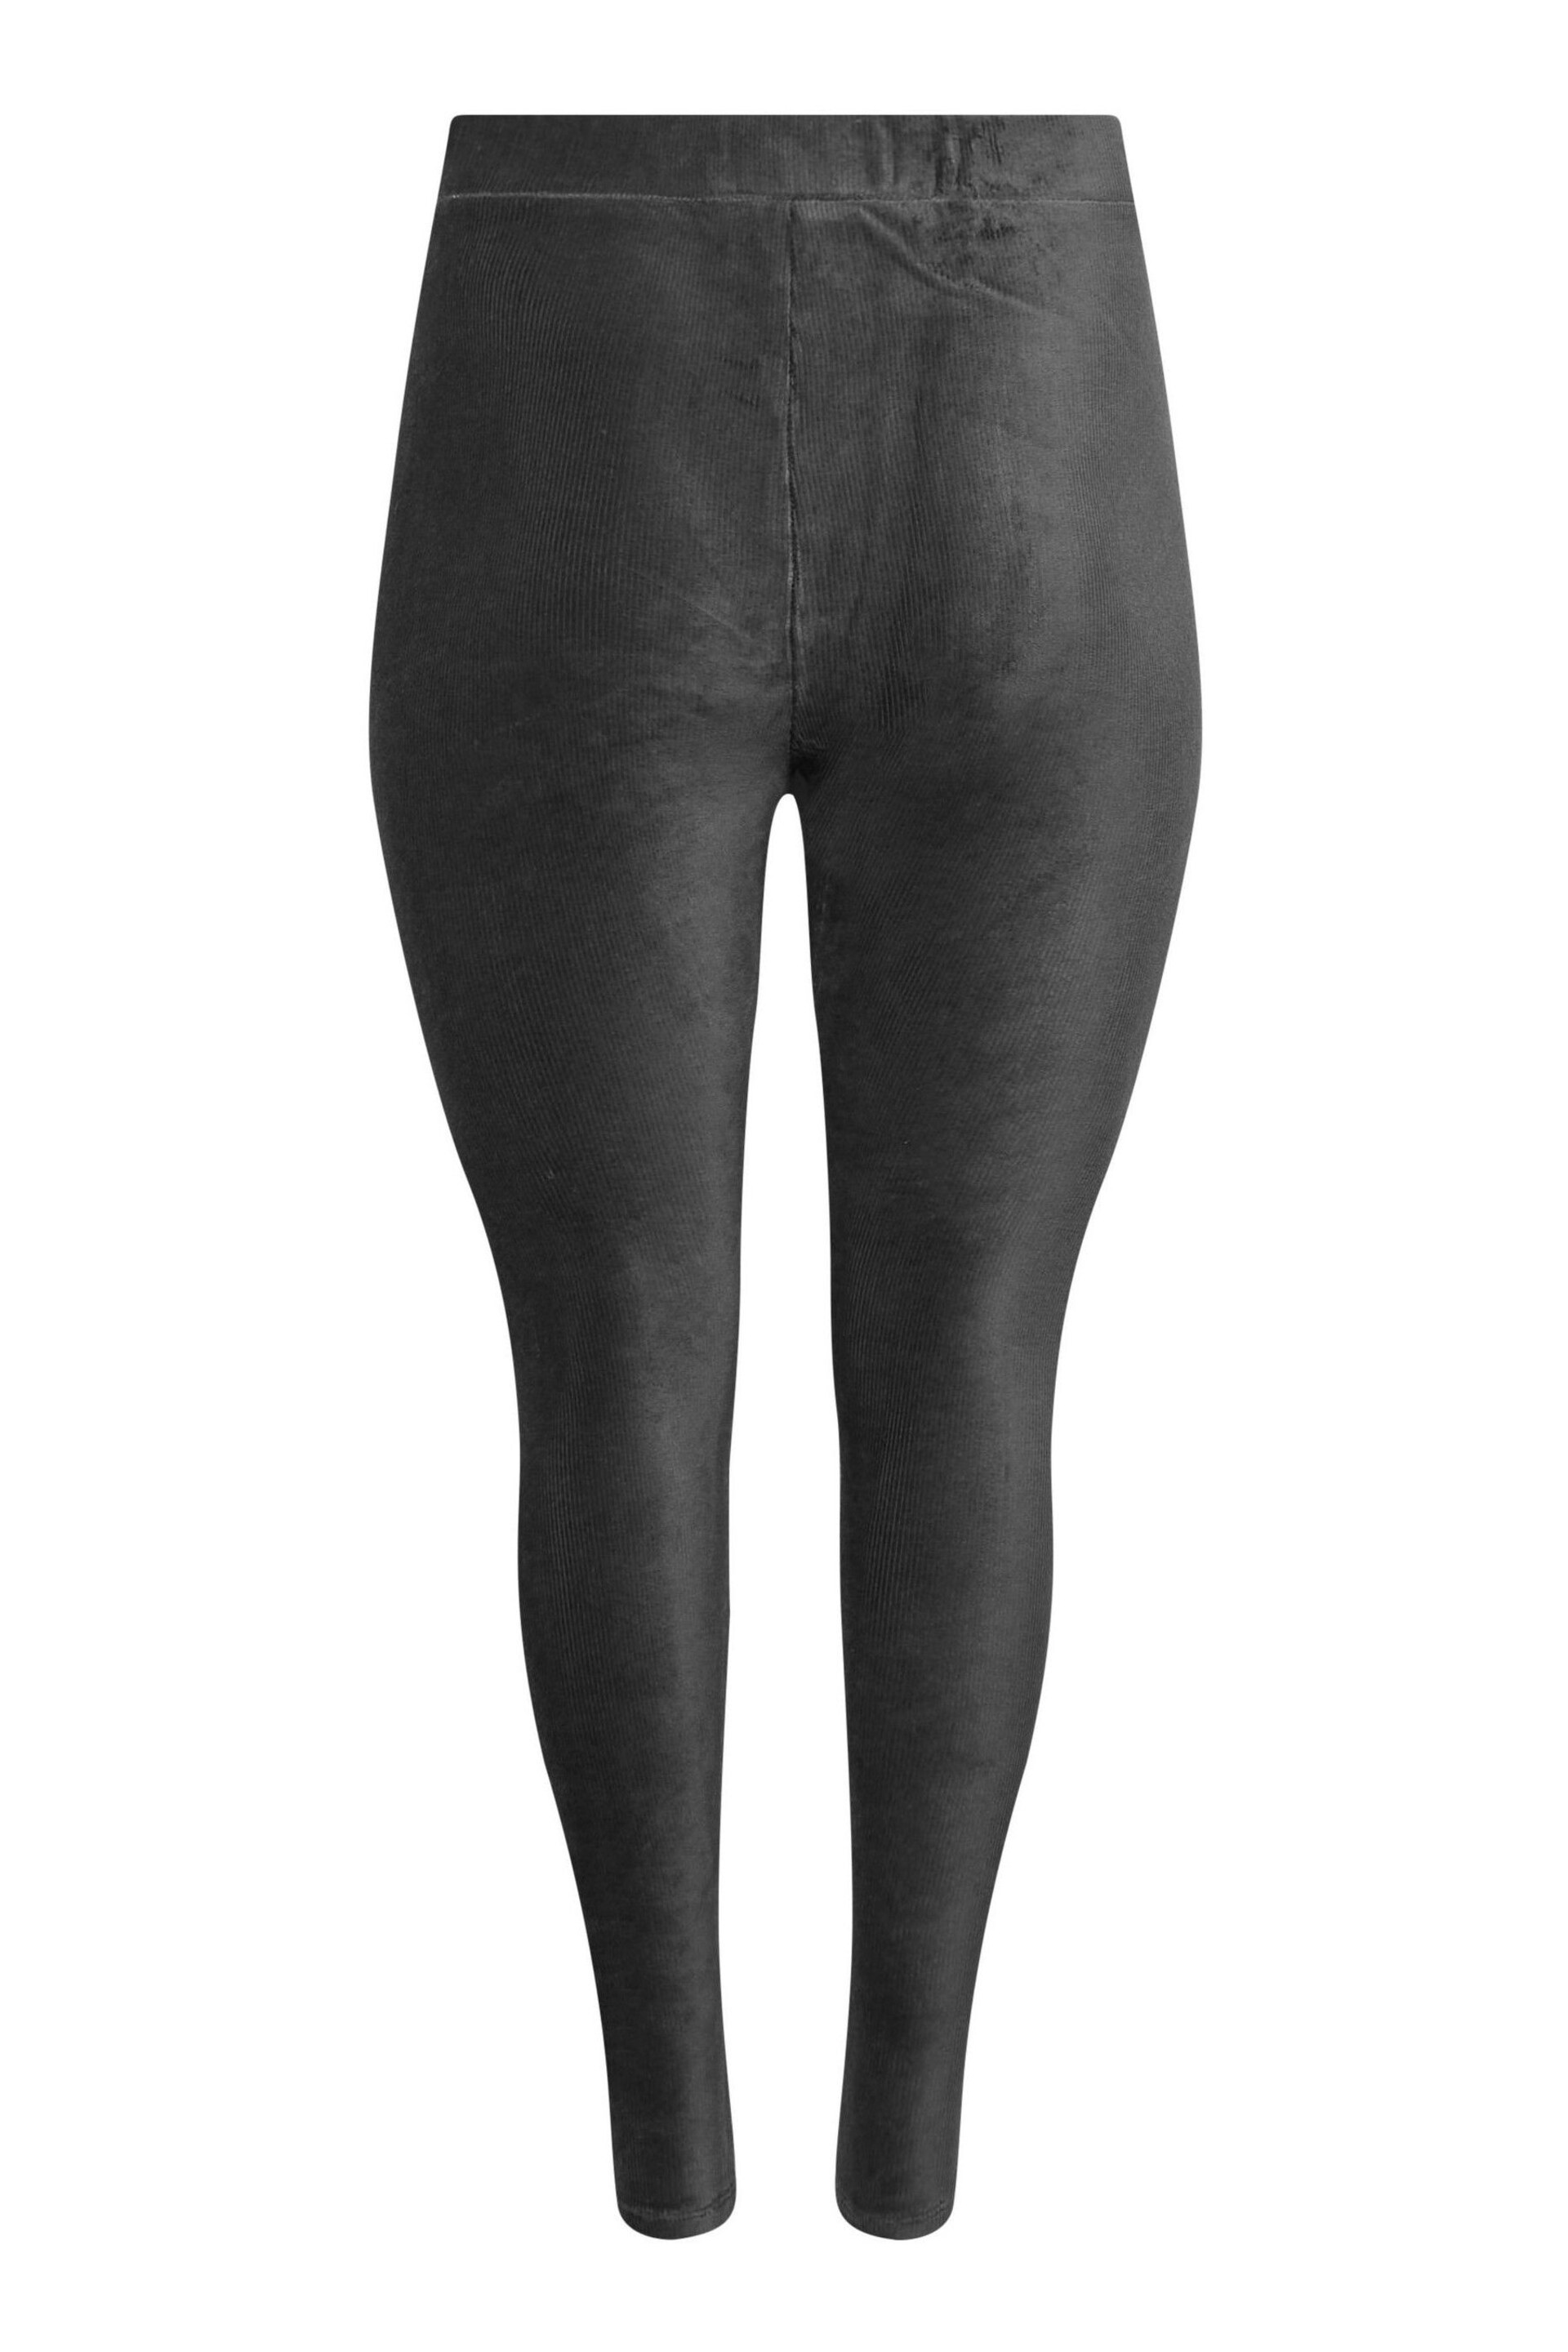 Yours Curve Grey Cord Leggings - Image 4 of 4